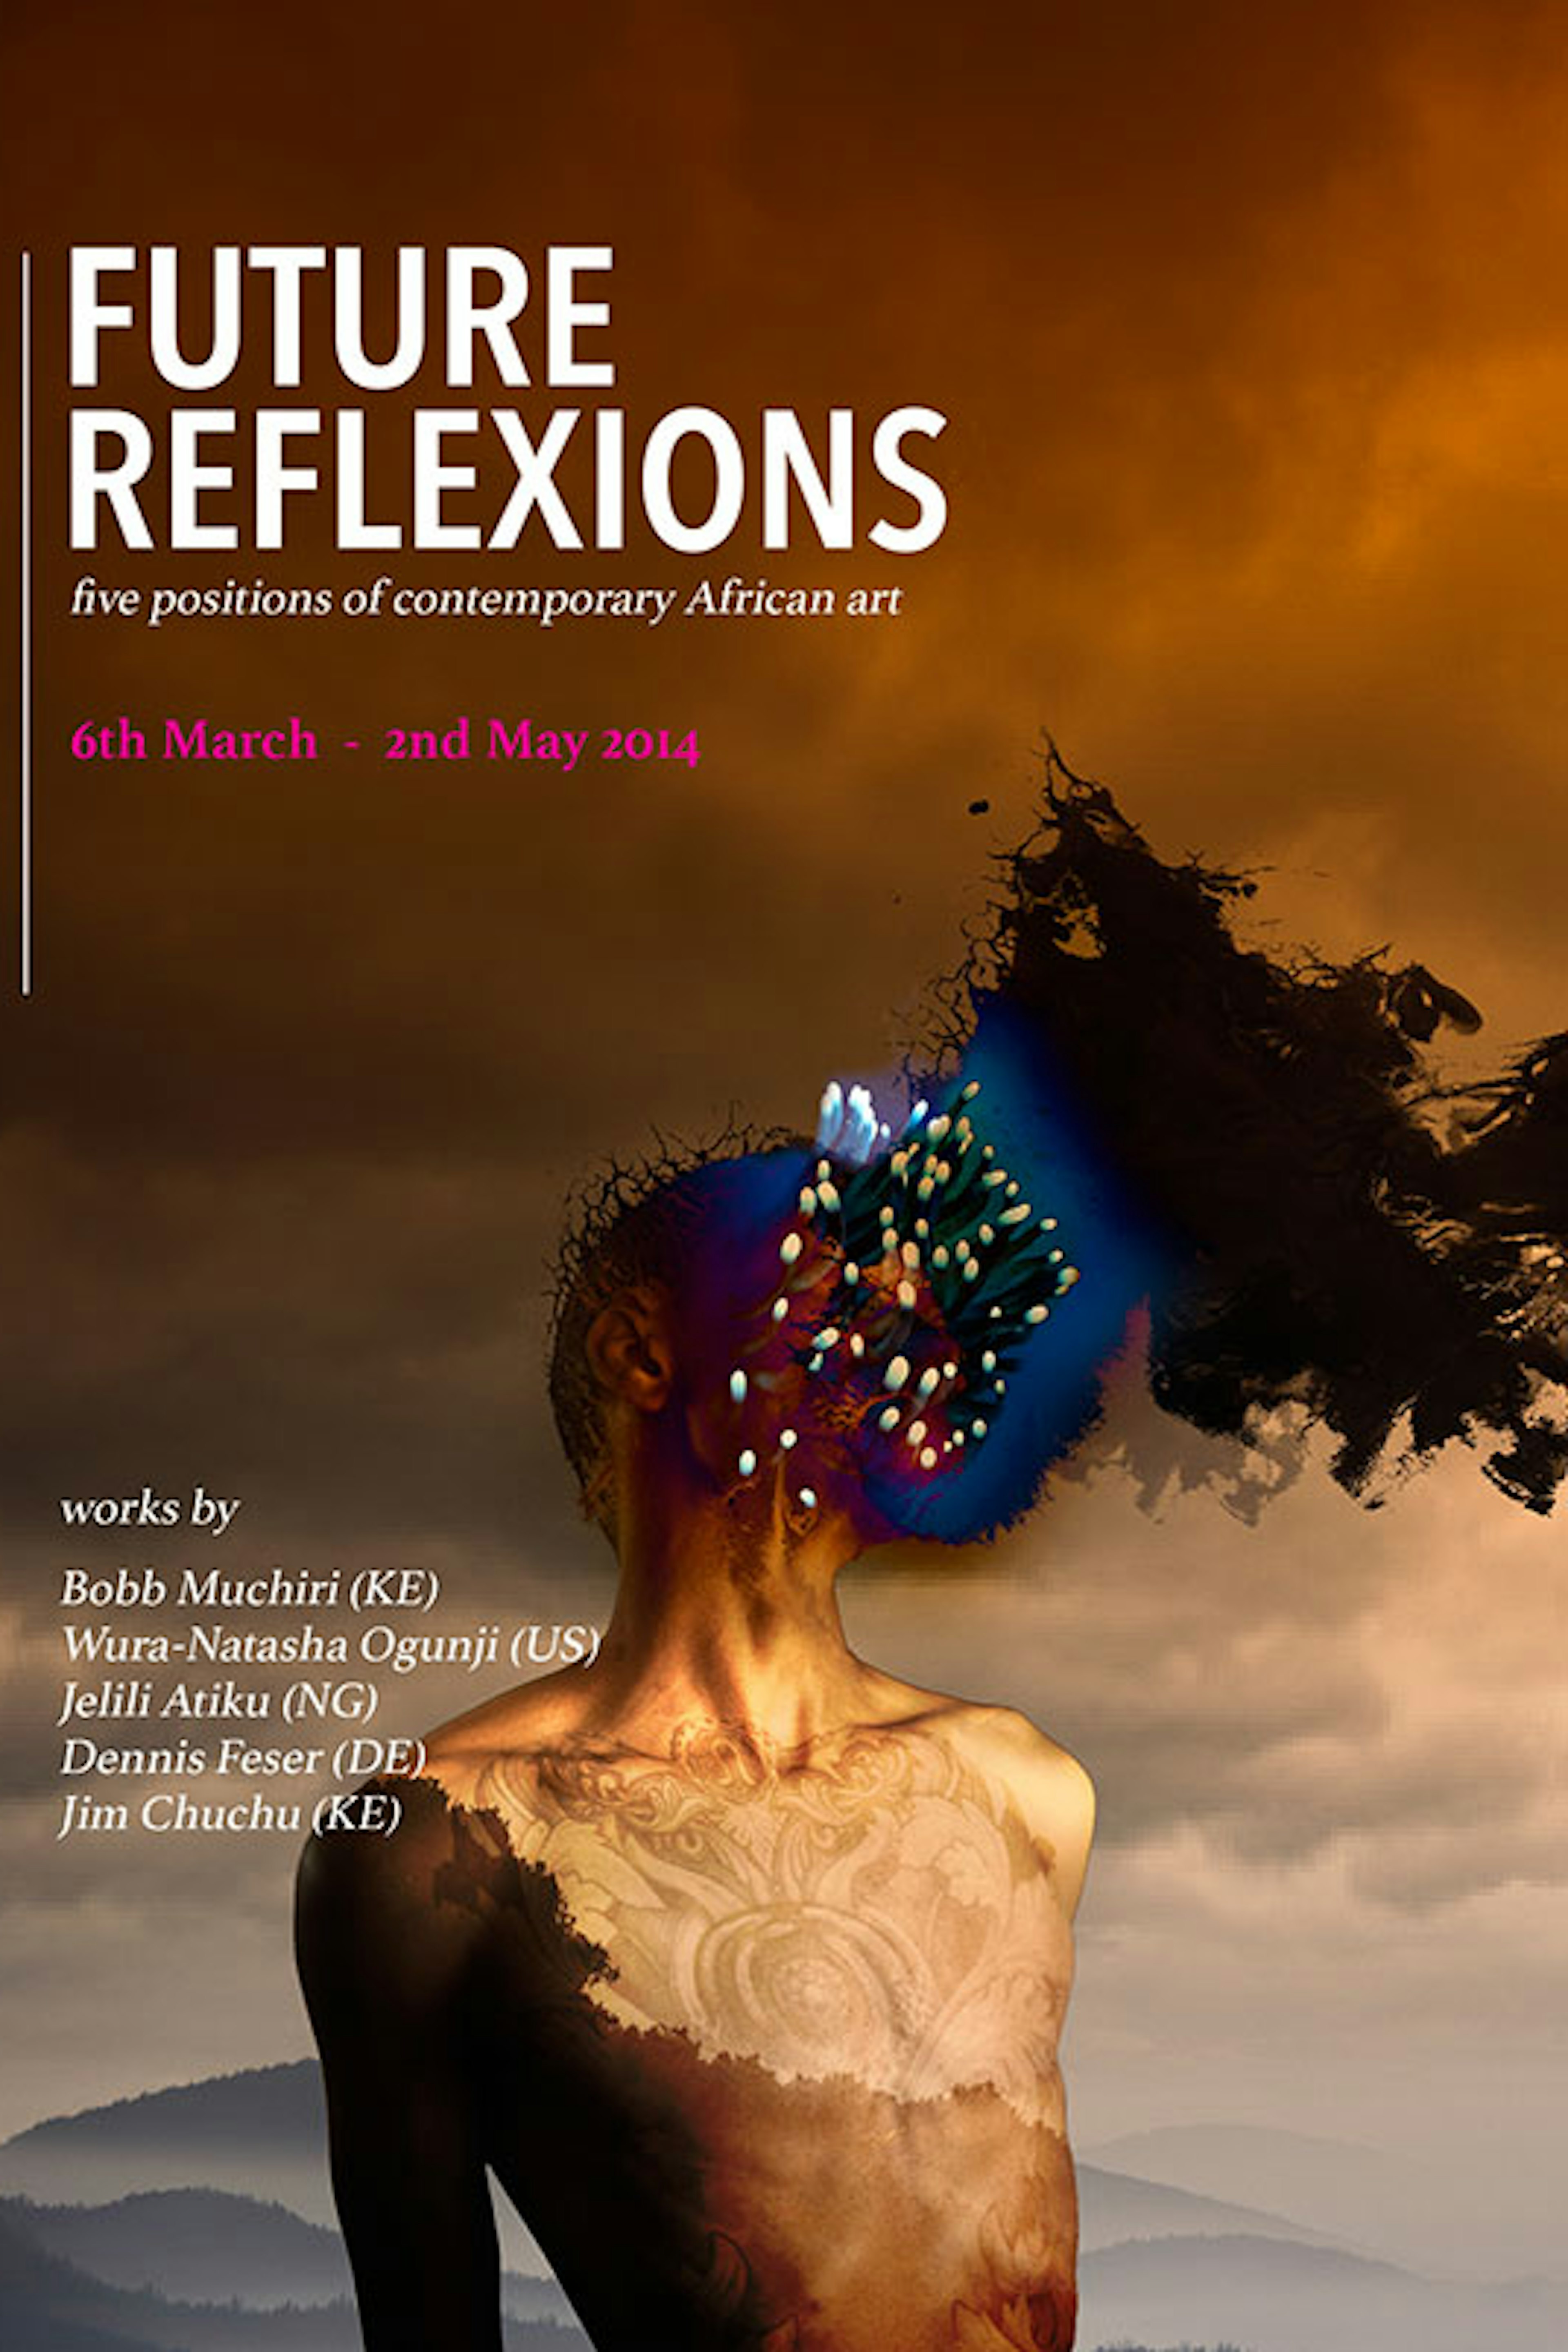 FUTURE REFLECTIONS EXHIBITION: Five positions of contemporary African Art